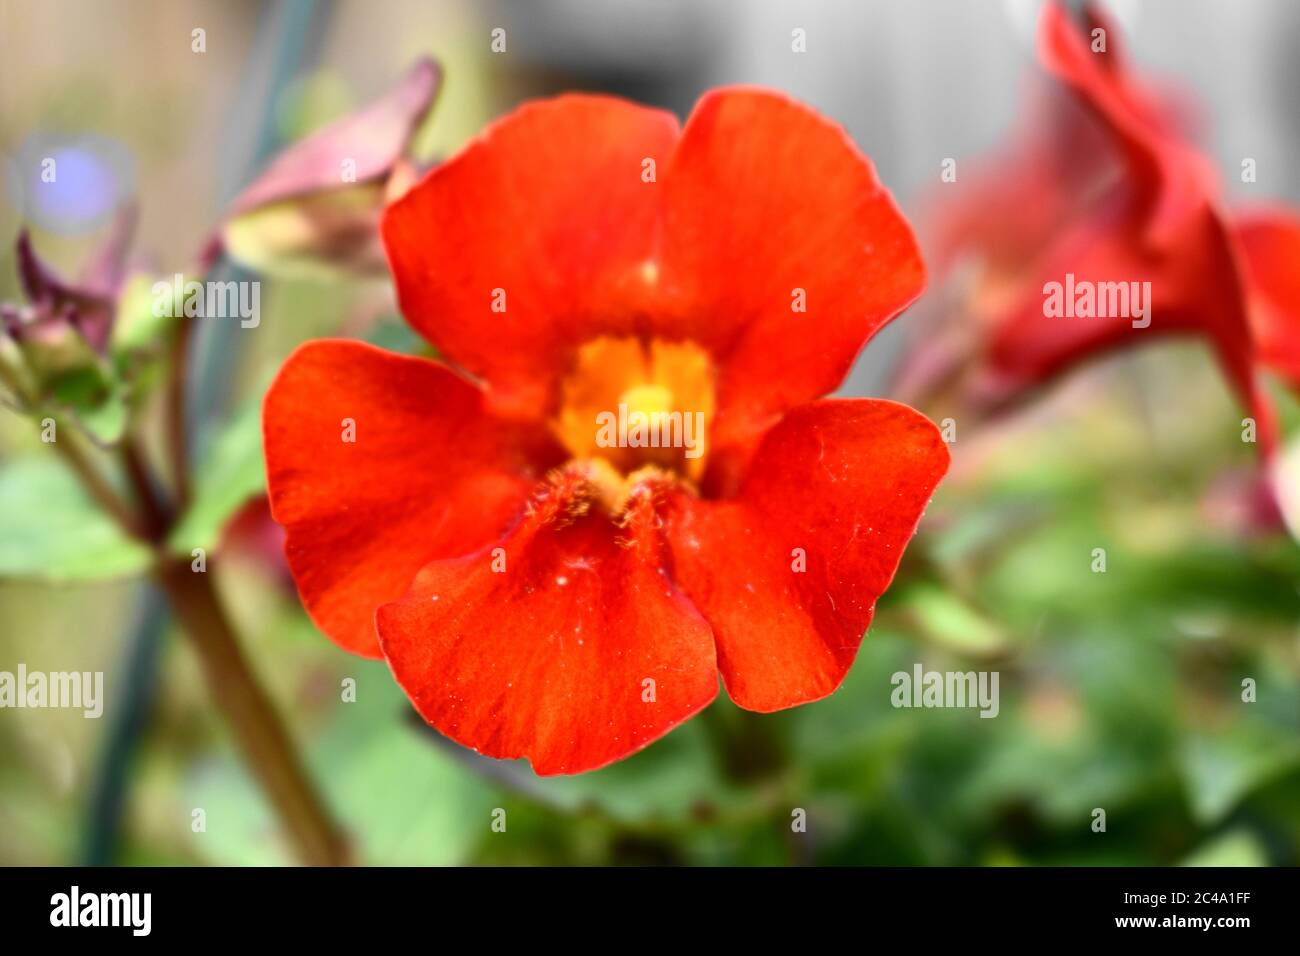 Vivid orange Mimulus [phrymaceae]with heart-shaped petals and prominent yellow stigma. .Blurred background. Stock Photo